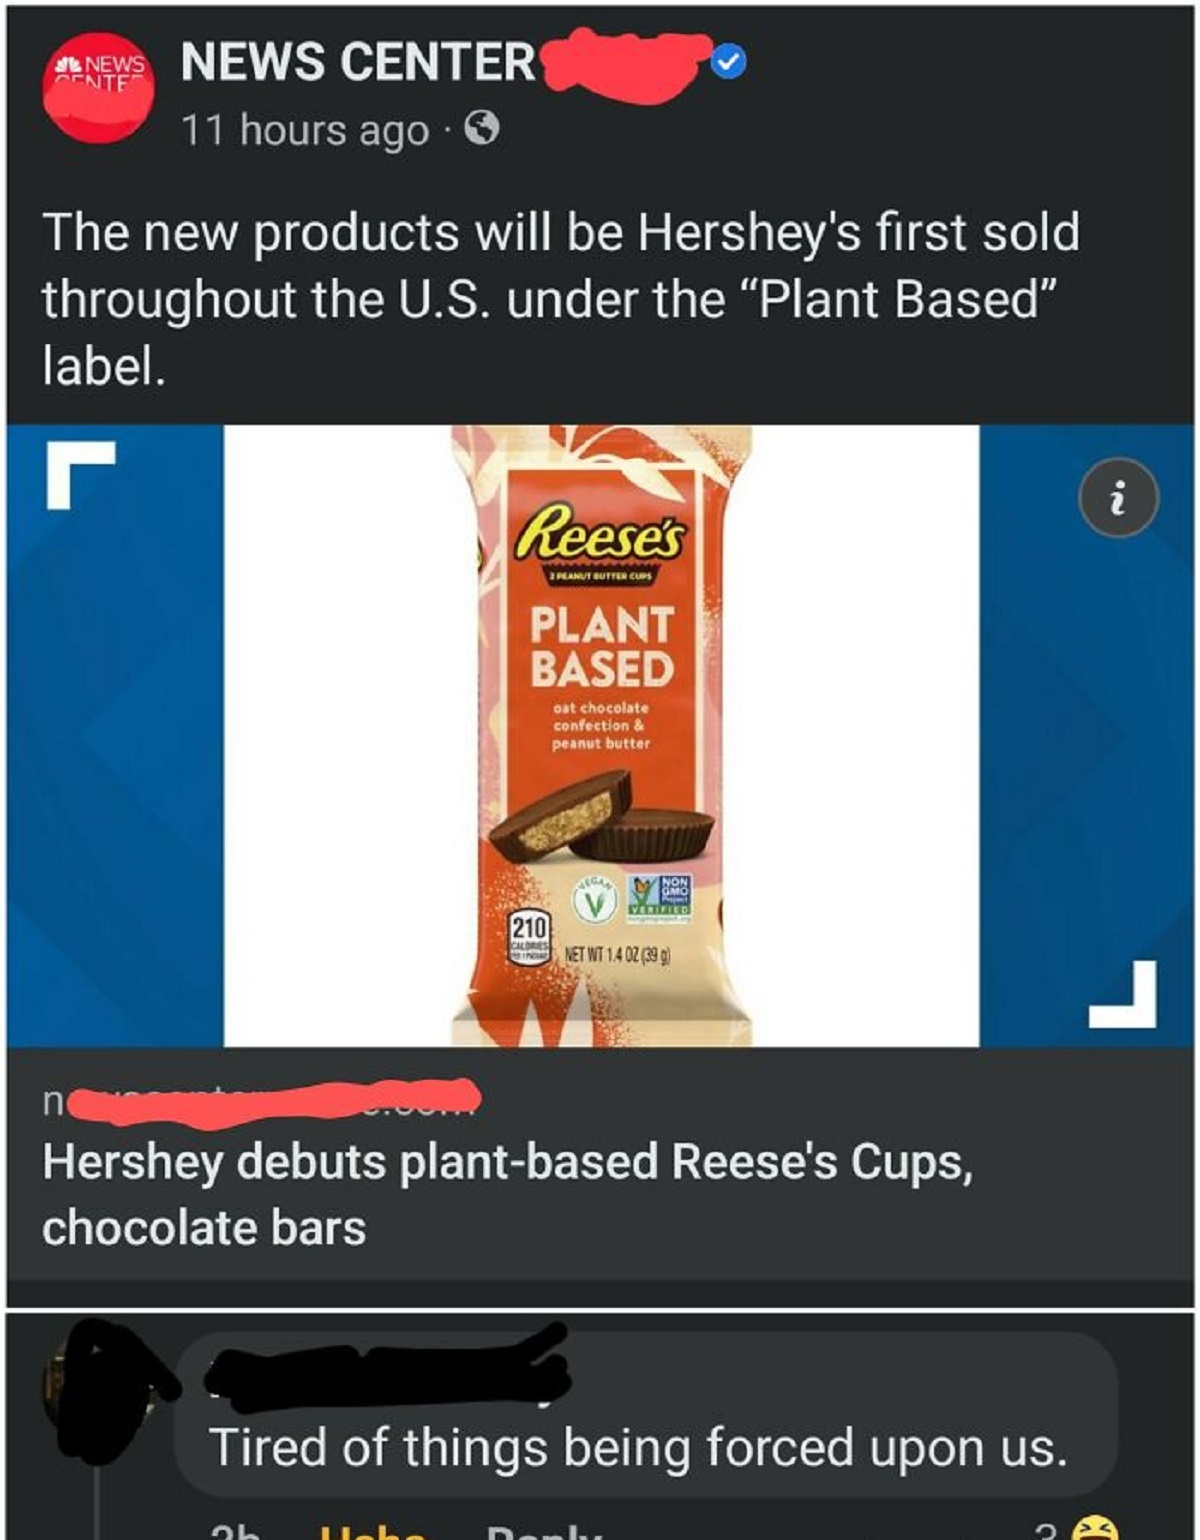 screenshot - News News Center Cente 11 hours ago . > The new products will be Hershey's first sold throughout the U.S. under the "Plant Based" label. L Reese's 2 Peanut Butter Cups Plant Based oat chocolate confection & peanut butter 210 Calories Incar No